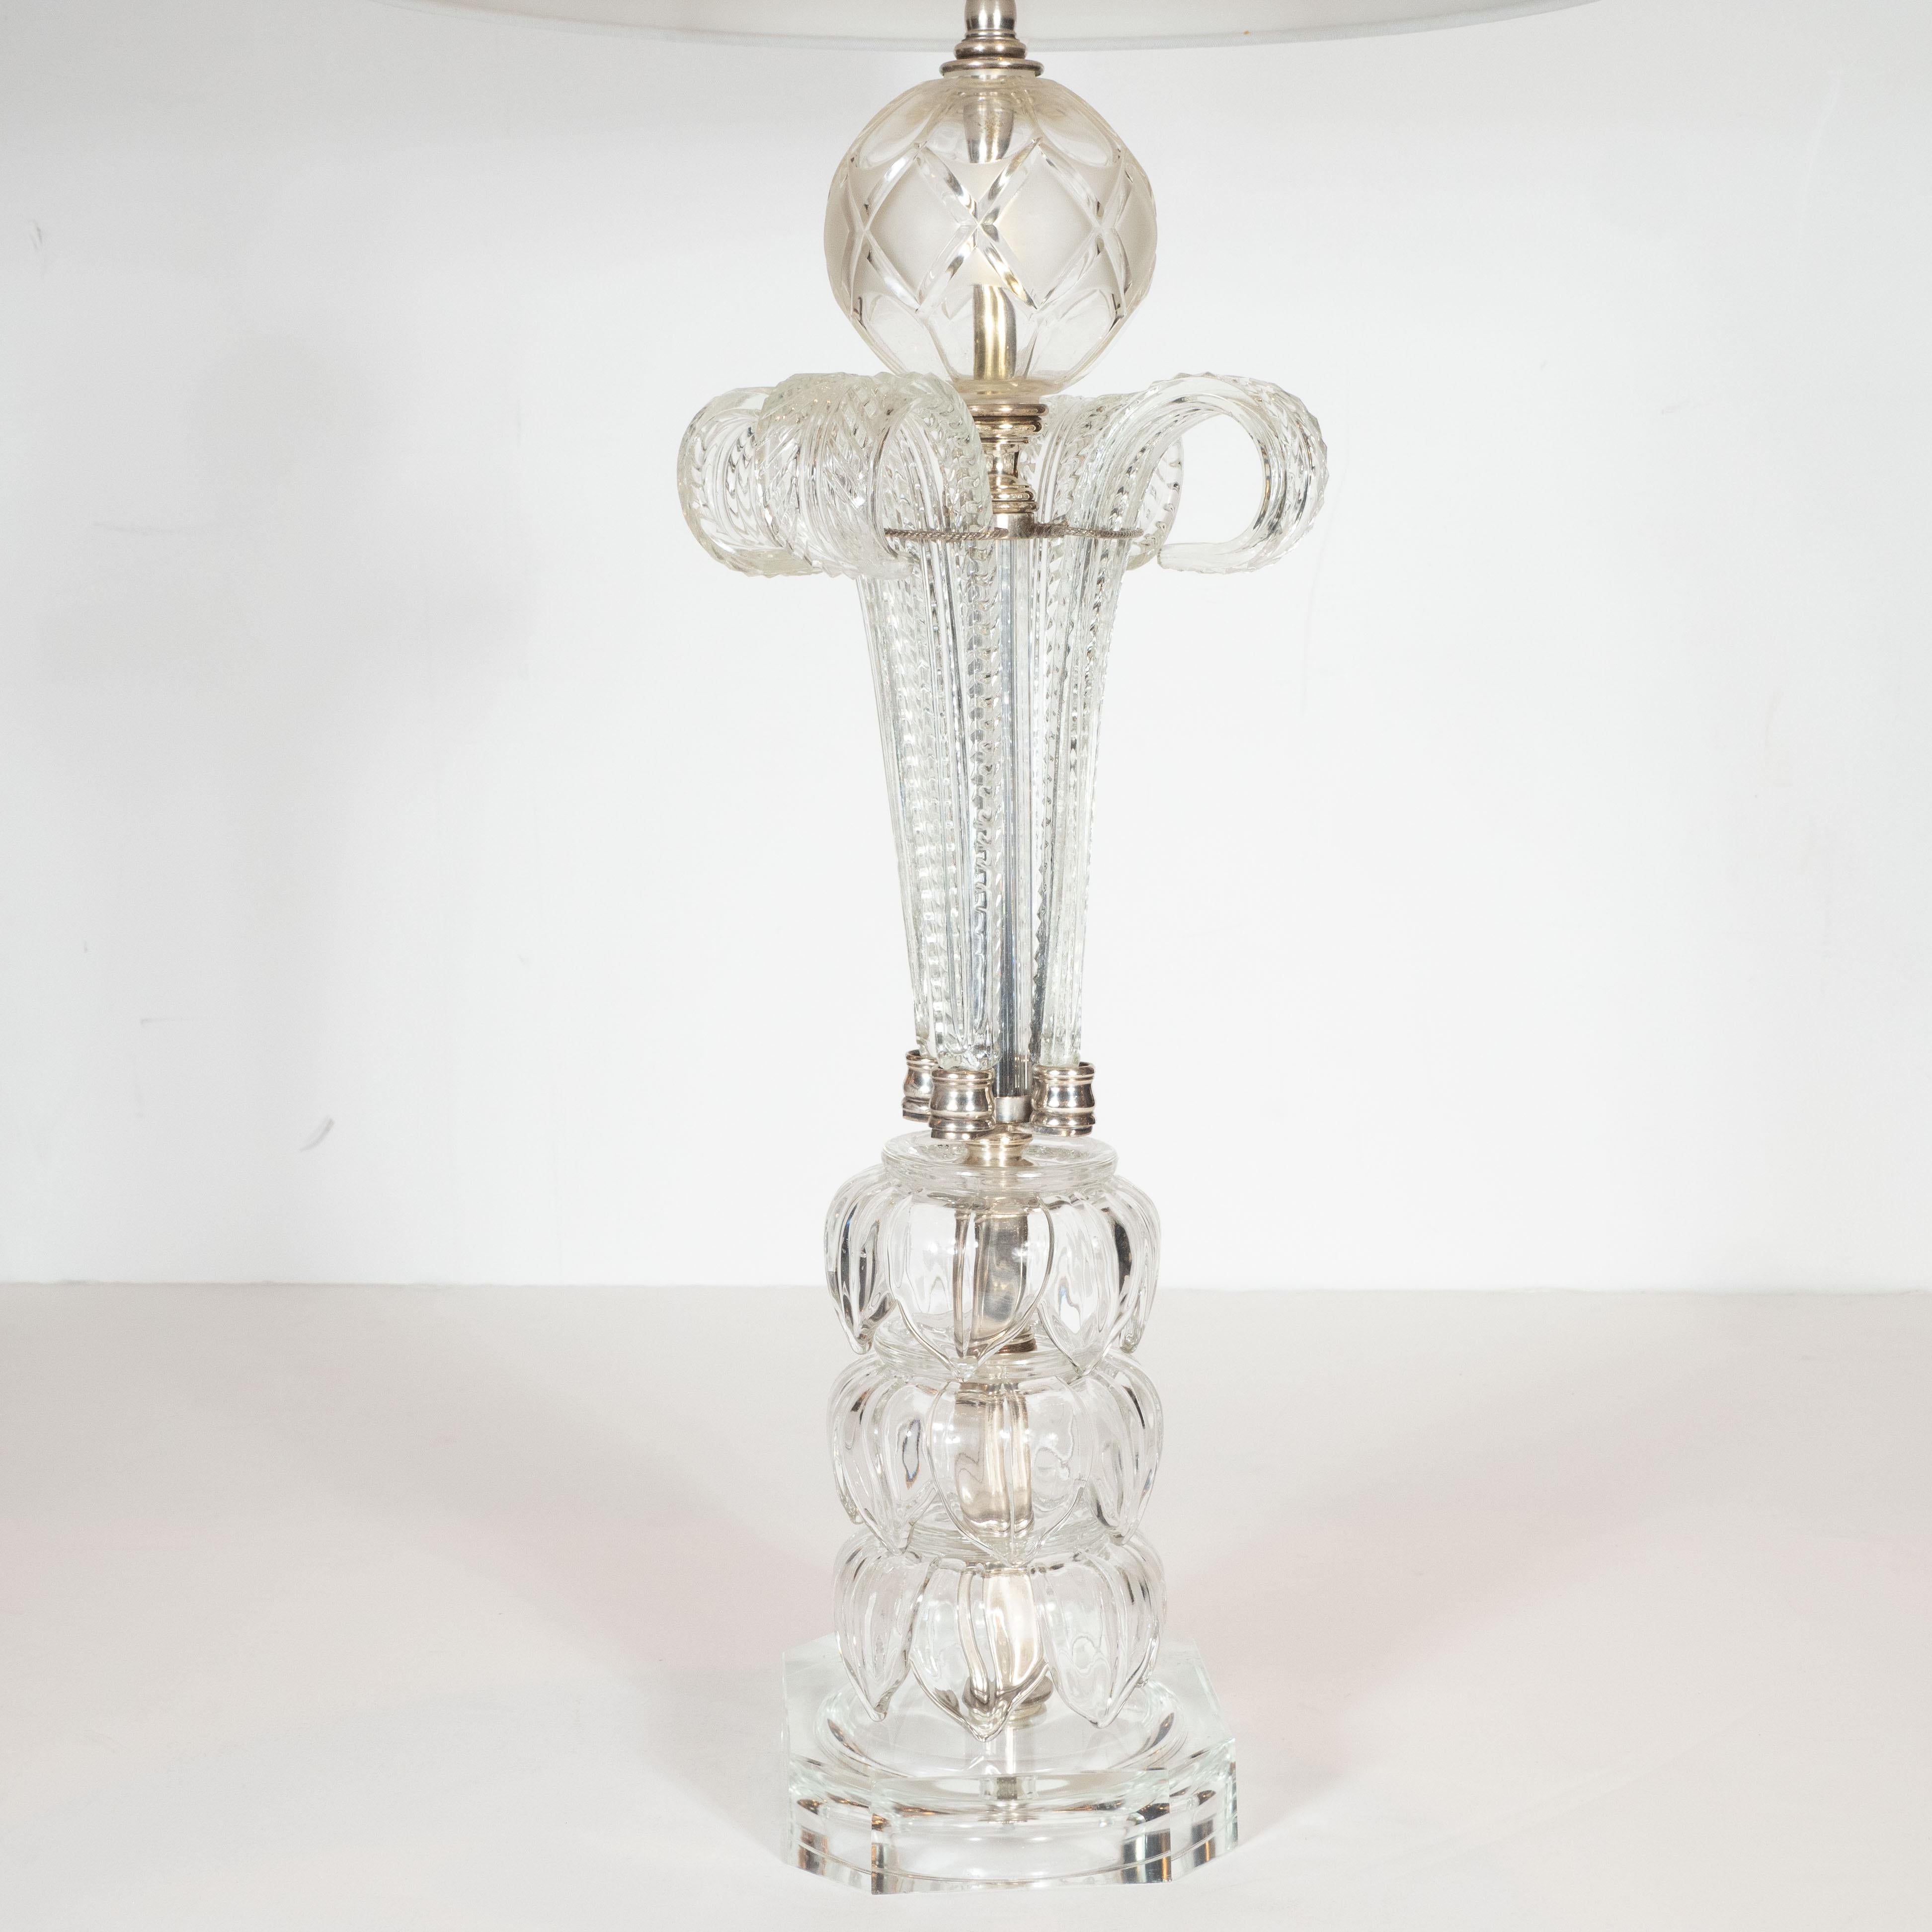 This exquisite Hollywood Regency table lamp was realized in the United States, circa 1940. It features three stacked volumetric ovoid forms with etched foliate detailing atop an elongated octagonal base from which ascends four stylized curling